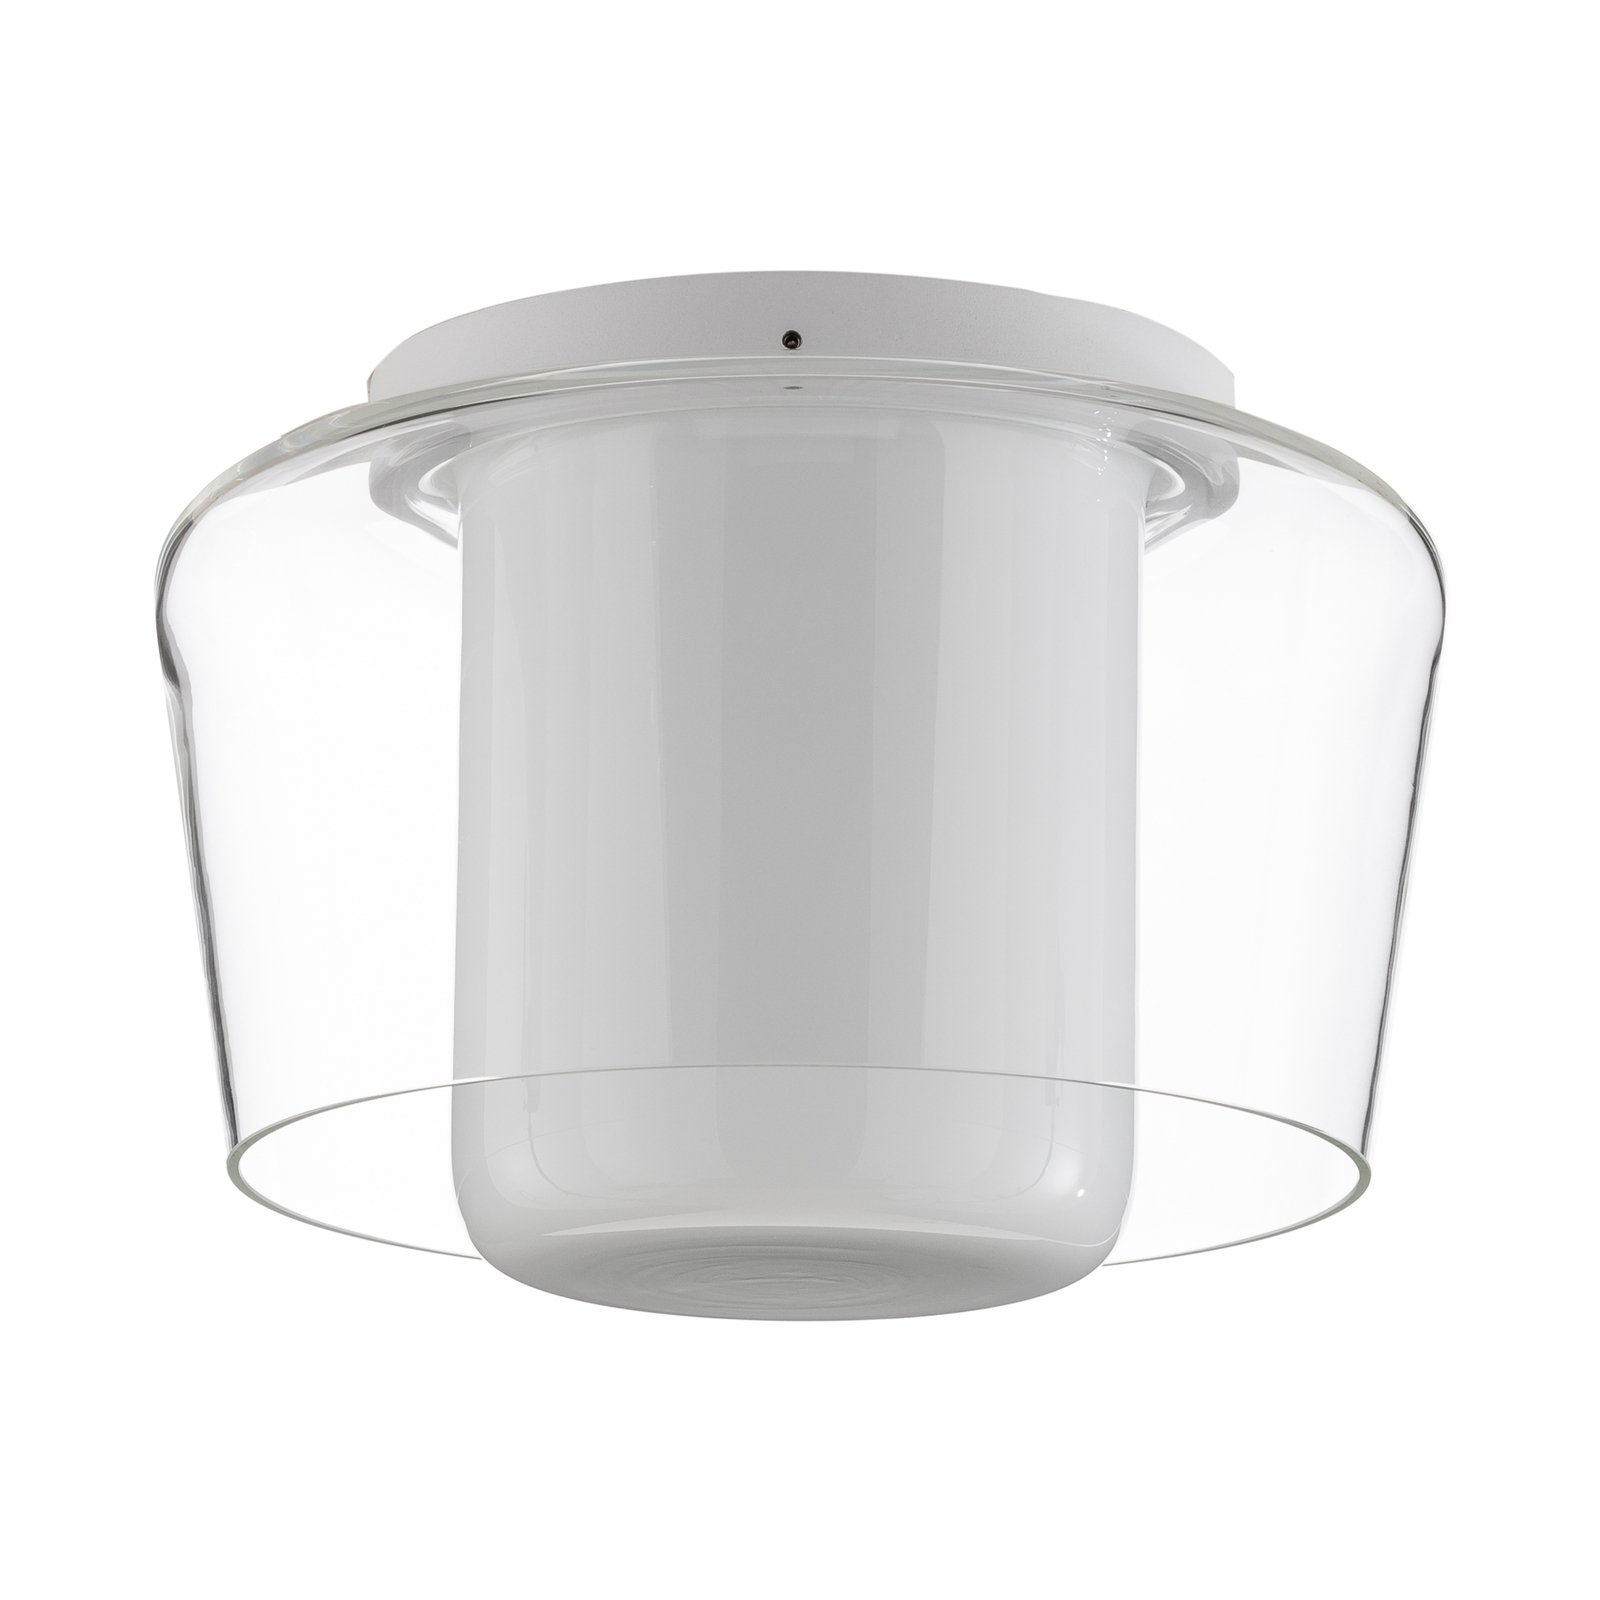 Helestra Canio glass ceiling light, clear outside